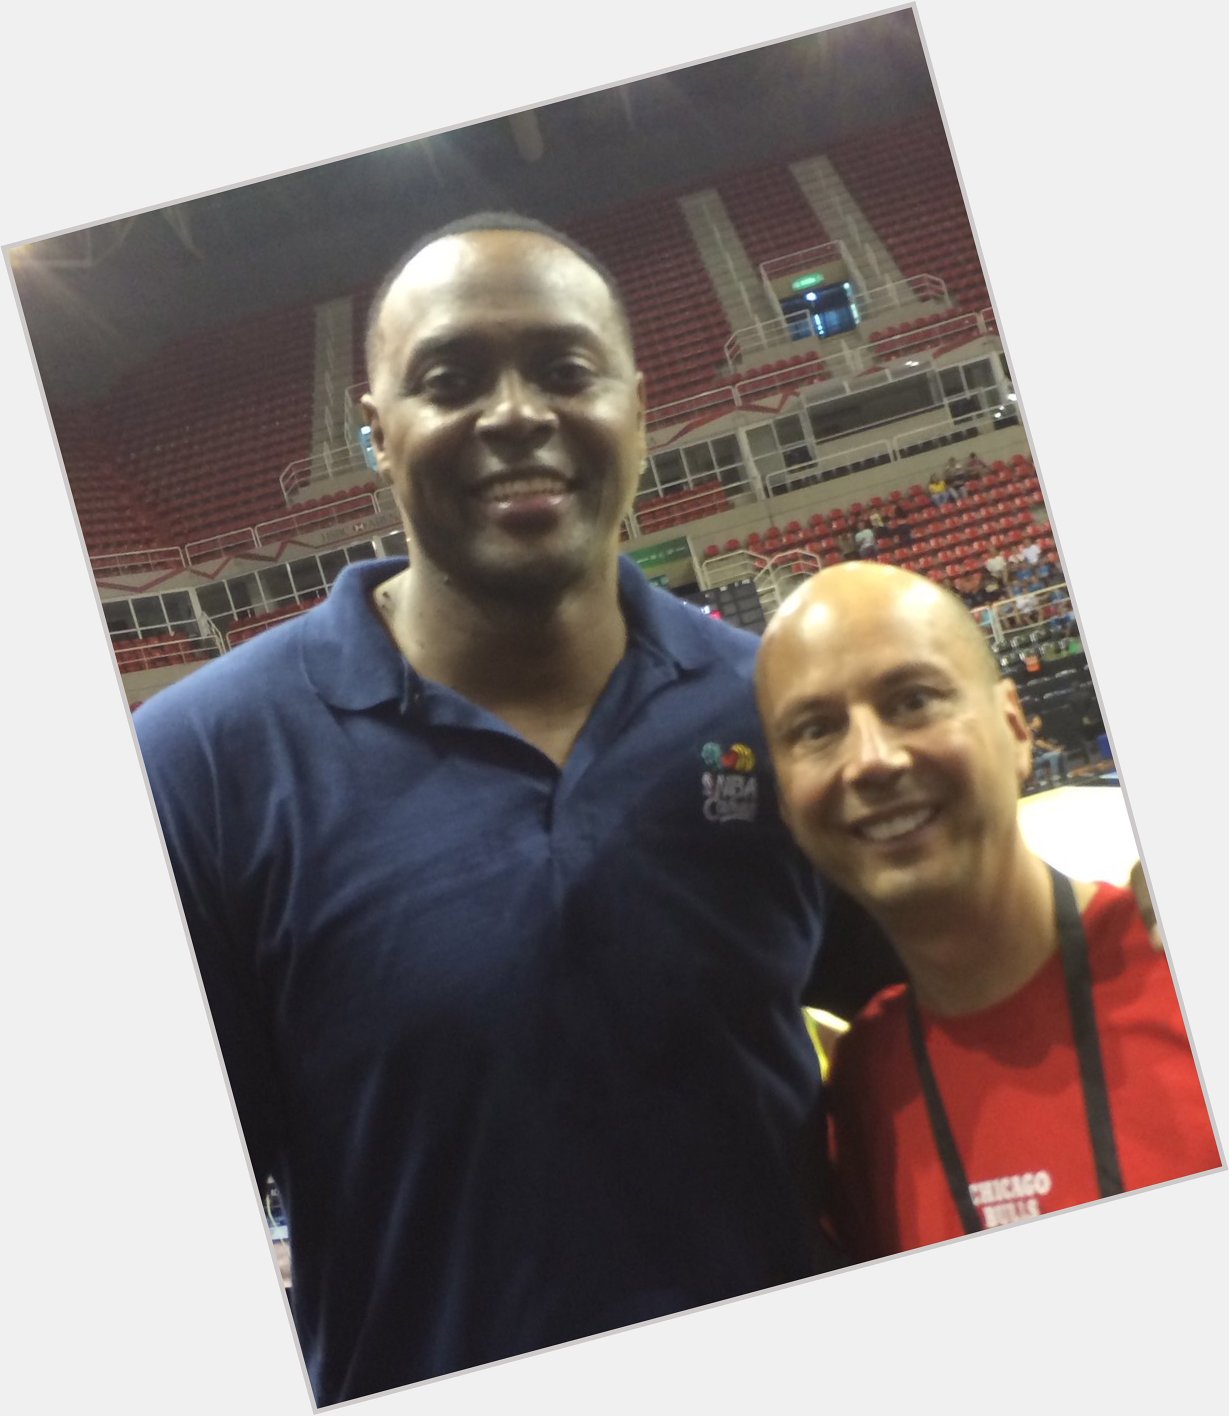 Happy Birthday to the great Horace Grant...a Bulls legend...and a fantastic person! Elite!  